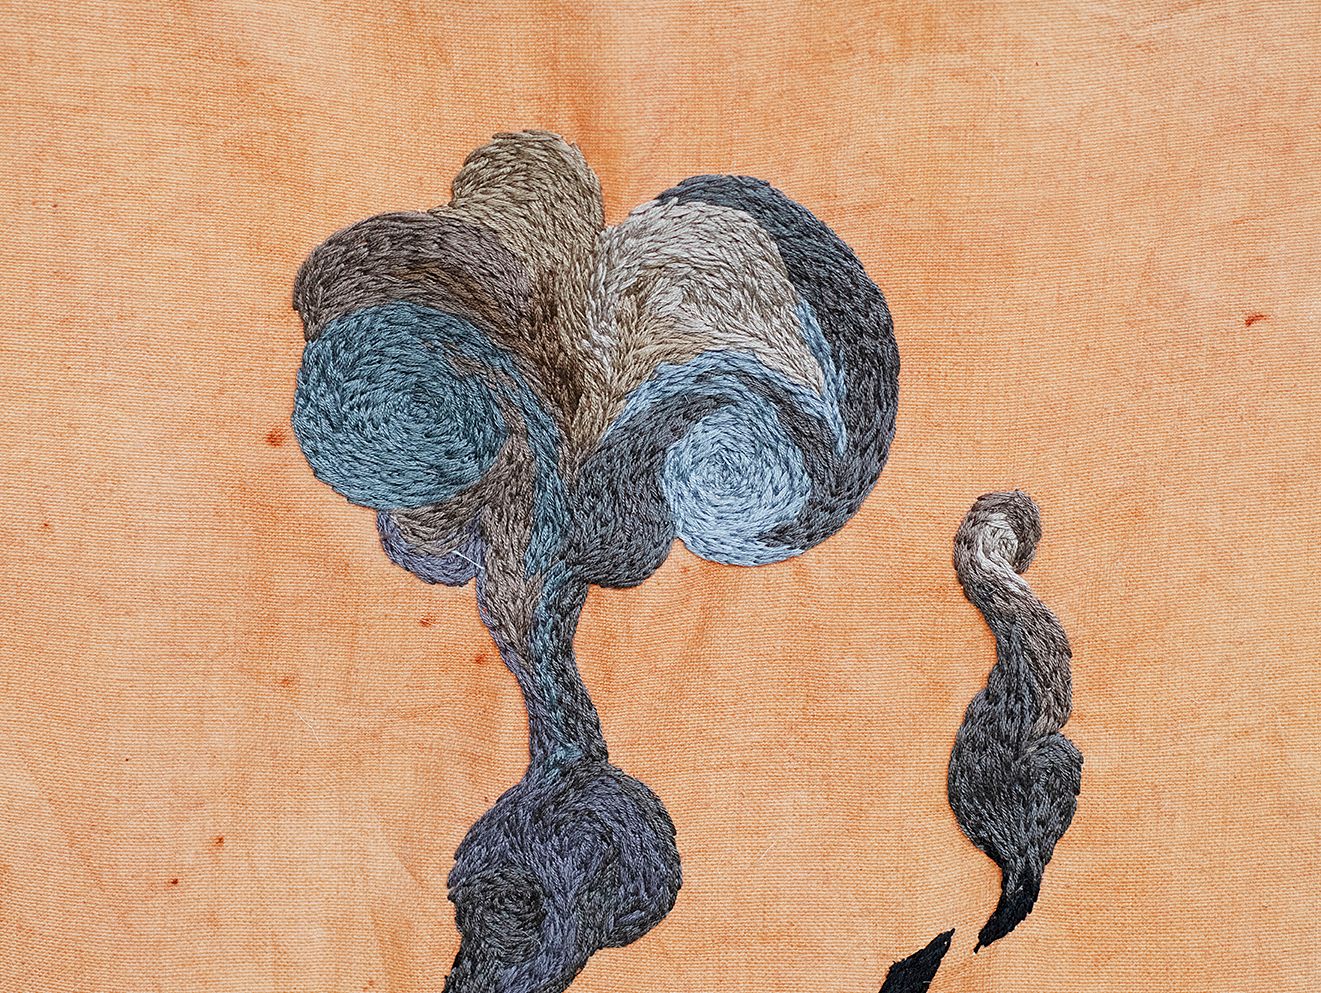 Quishile Charan, Burning Ganna Khet (Burning Sugarcane Farm), 2021, 153cm by 152cm, close up of embroidery detail. Technique: hand dyed textile, embroidery thread, cotton, hessian sacks. Textile is naturally dyed with avocado seeds. Image taken by: Raymond Sagapolutele. 